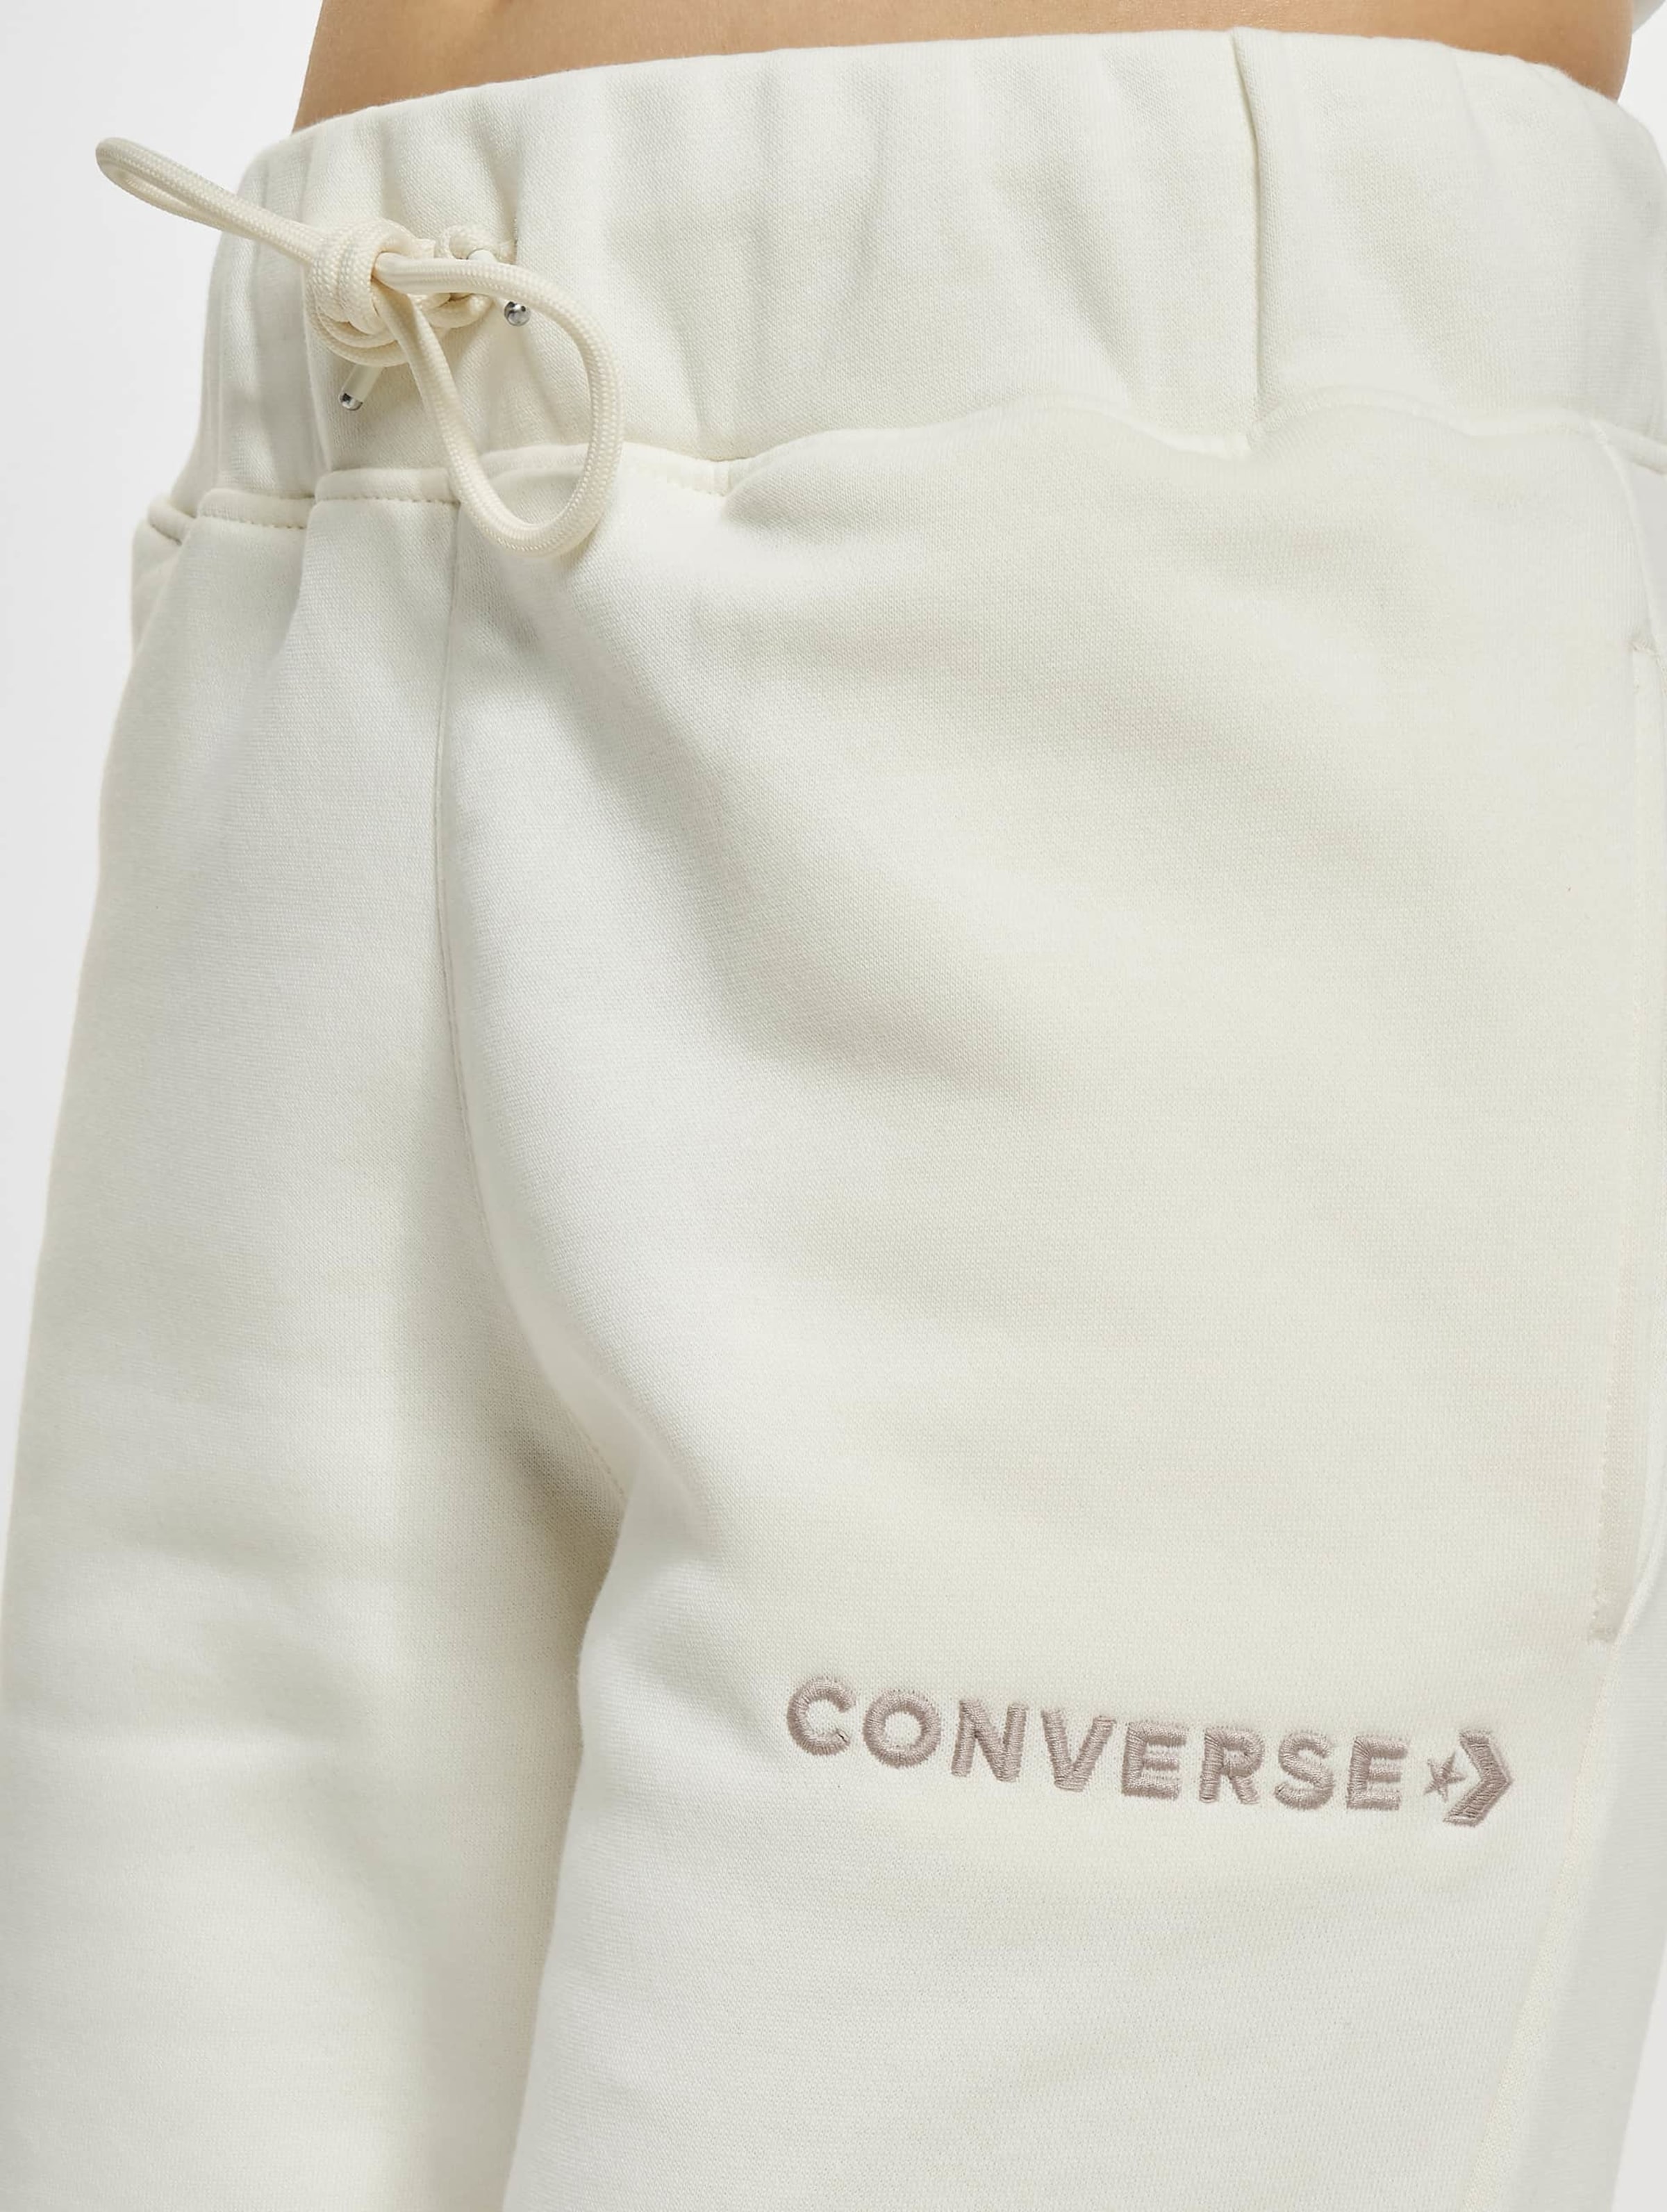 Converse TAPERED DAGGER PANT - 10020974-a02 - Sneakersnstuff (SNS) |  Sneakersnstuff (SNS)